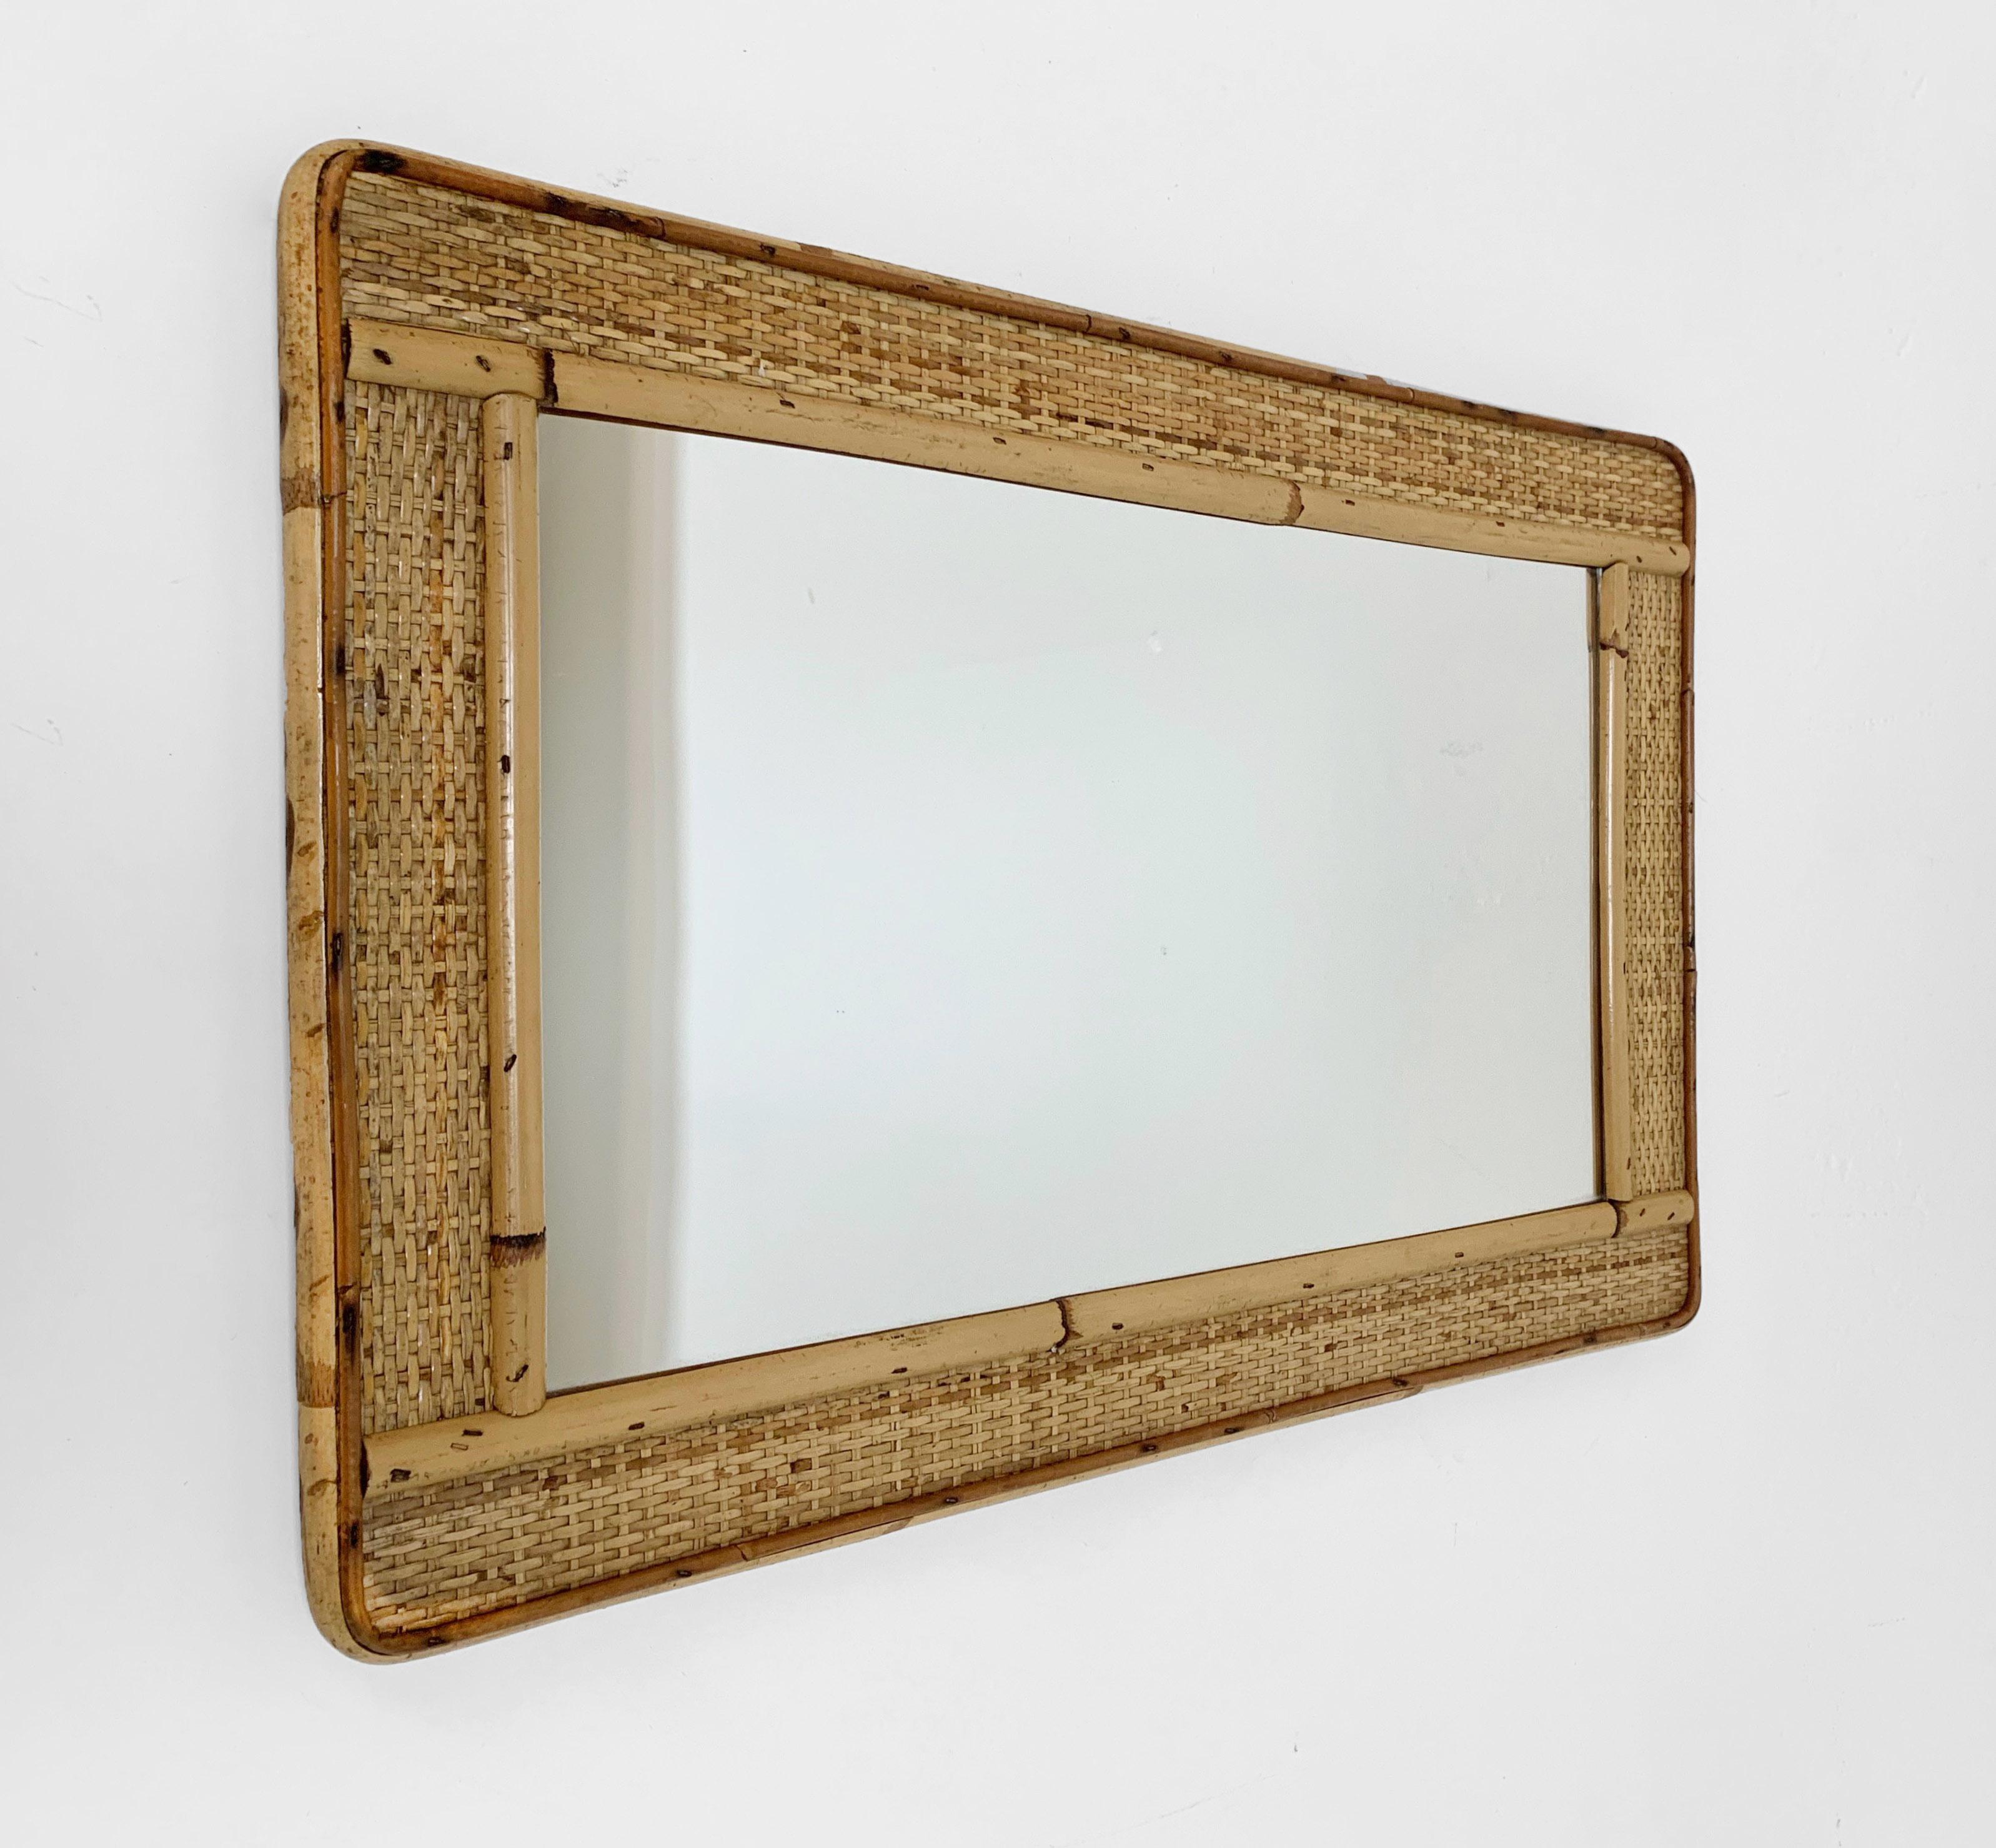 Mid-Century Modern Rectangular Mirror with Bamboo Wicker Woven Frame from the 1970s, Italy For Sale